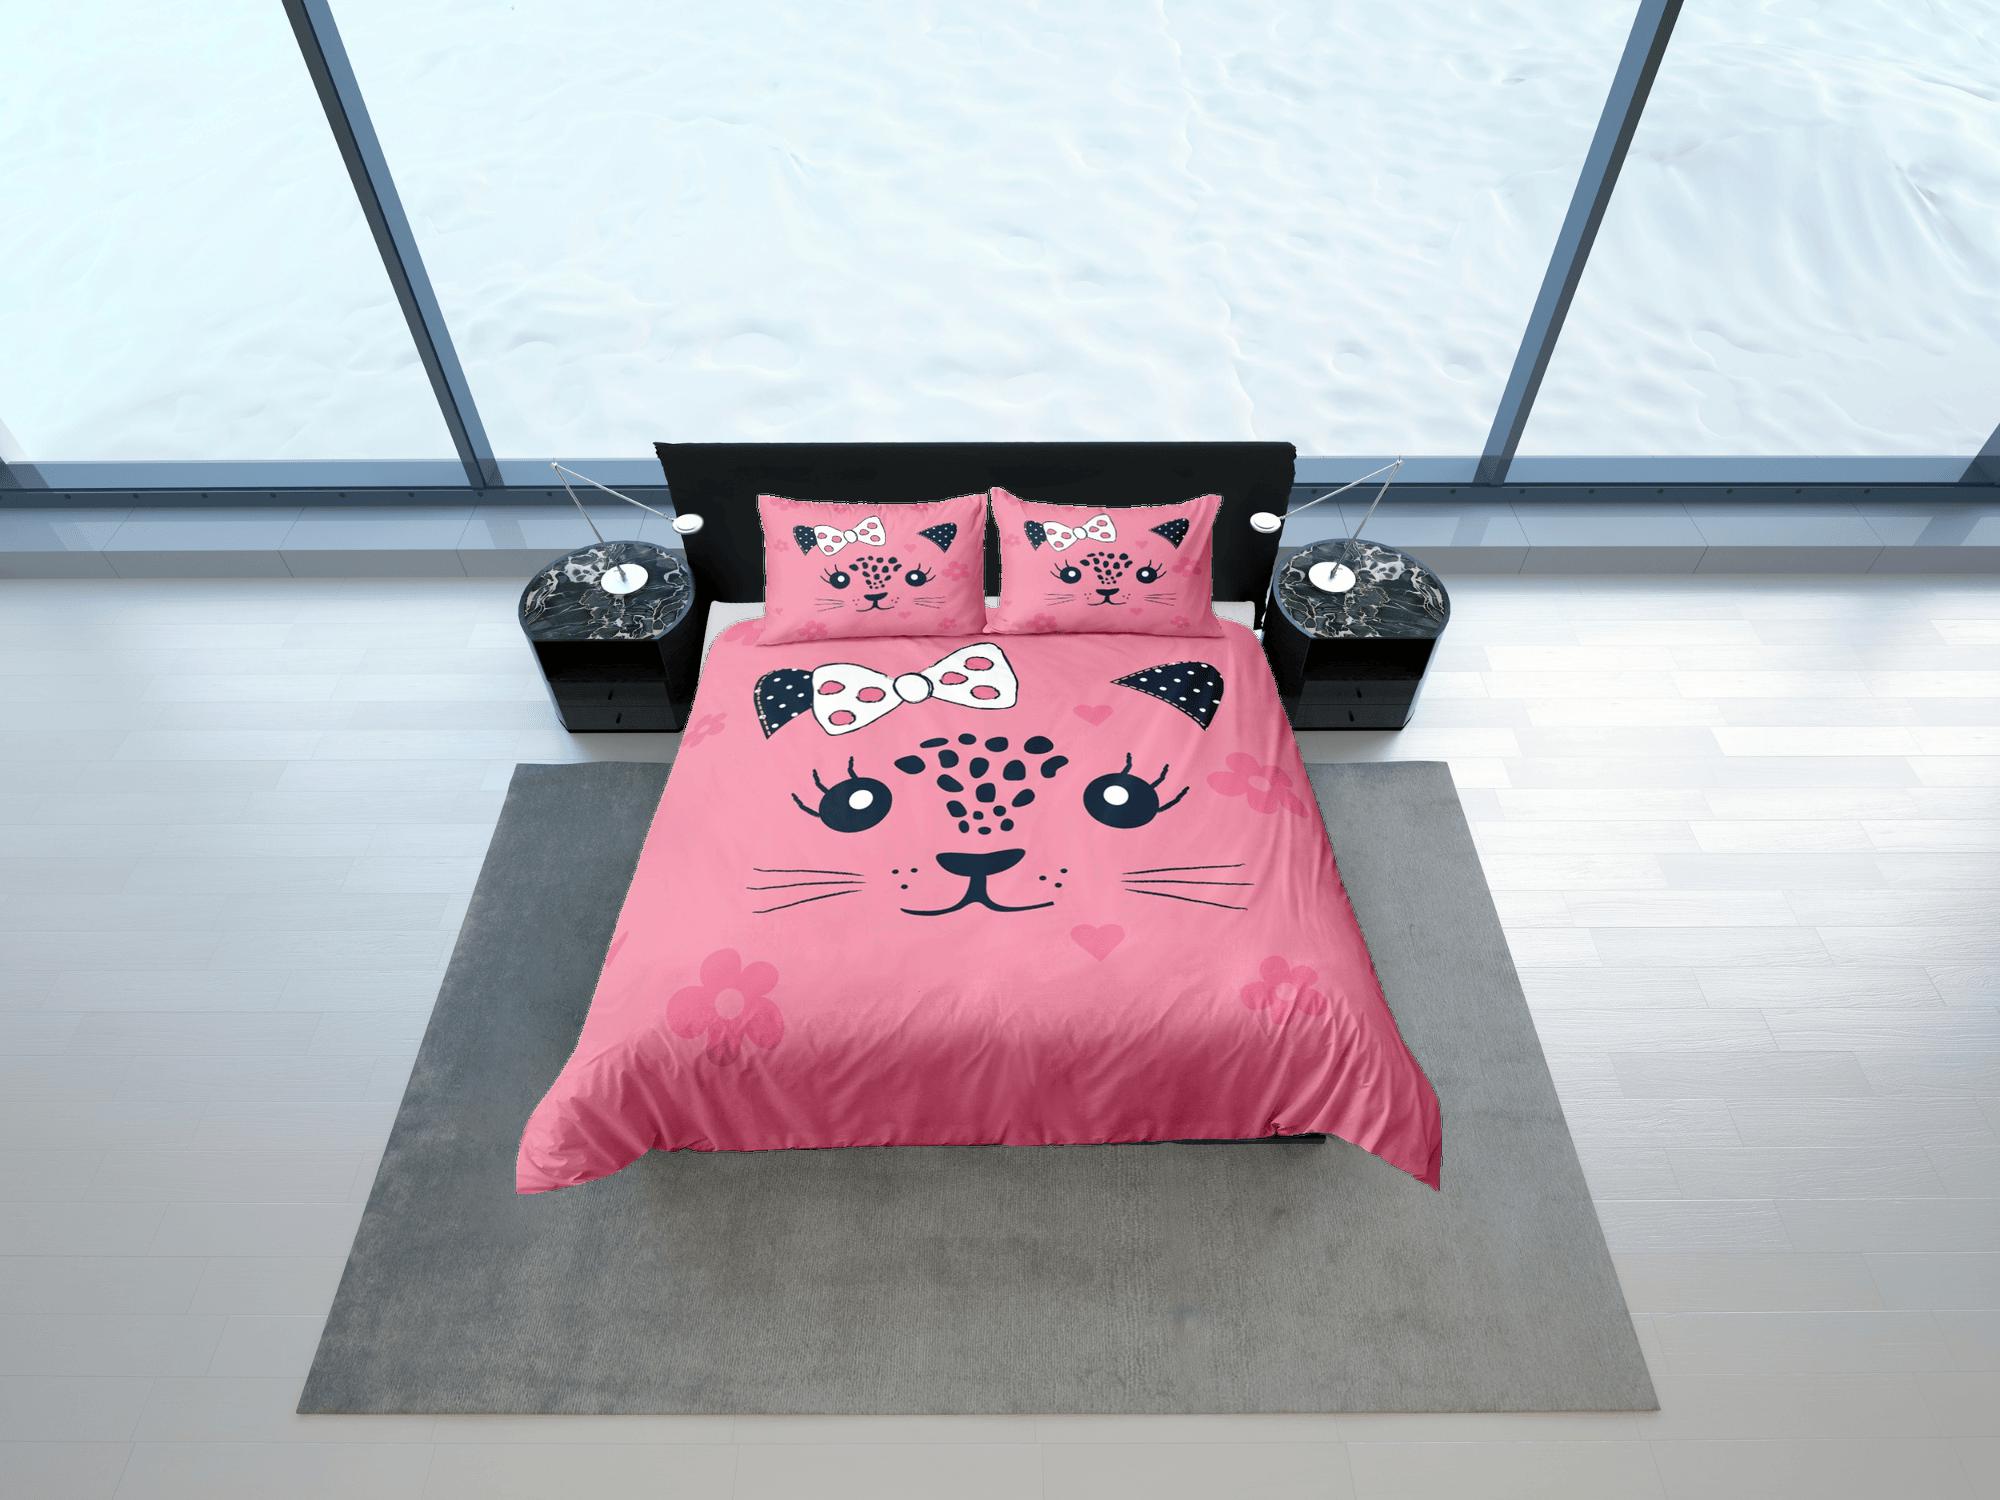 daintyduvet Cute Girly Cat Pink Bedding, Toddler Bedding, Kids Duvet Cover Set, Baby Bedding Cat Face with Ribbon Doona Cover up to California King Size